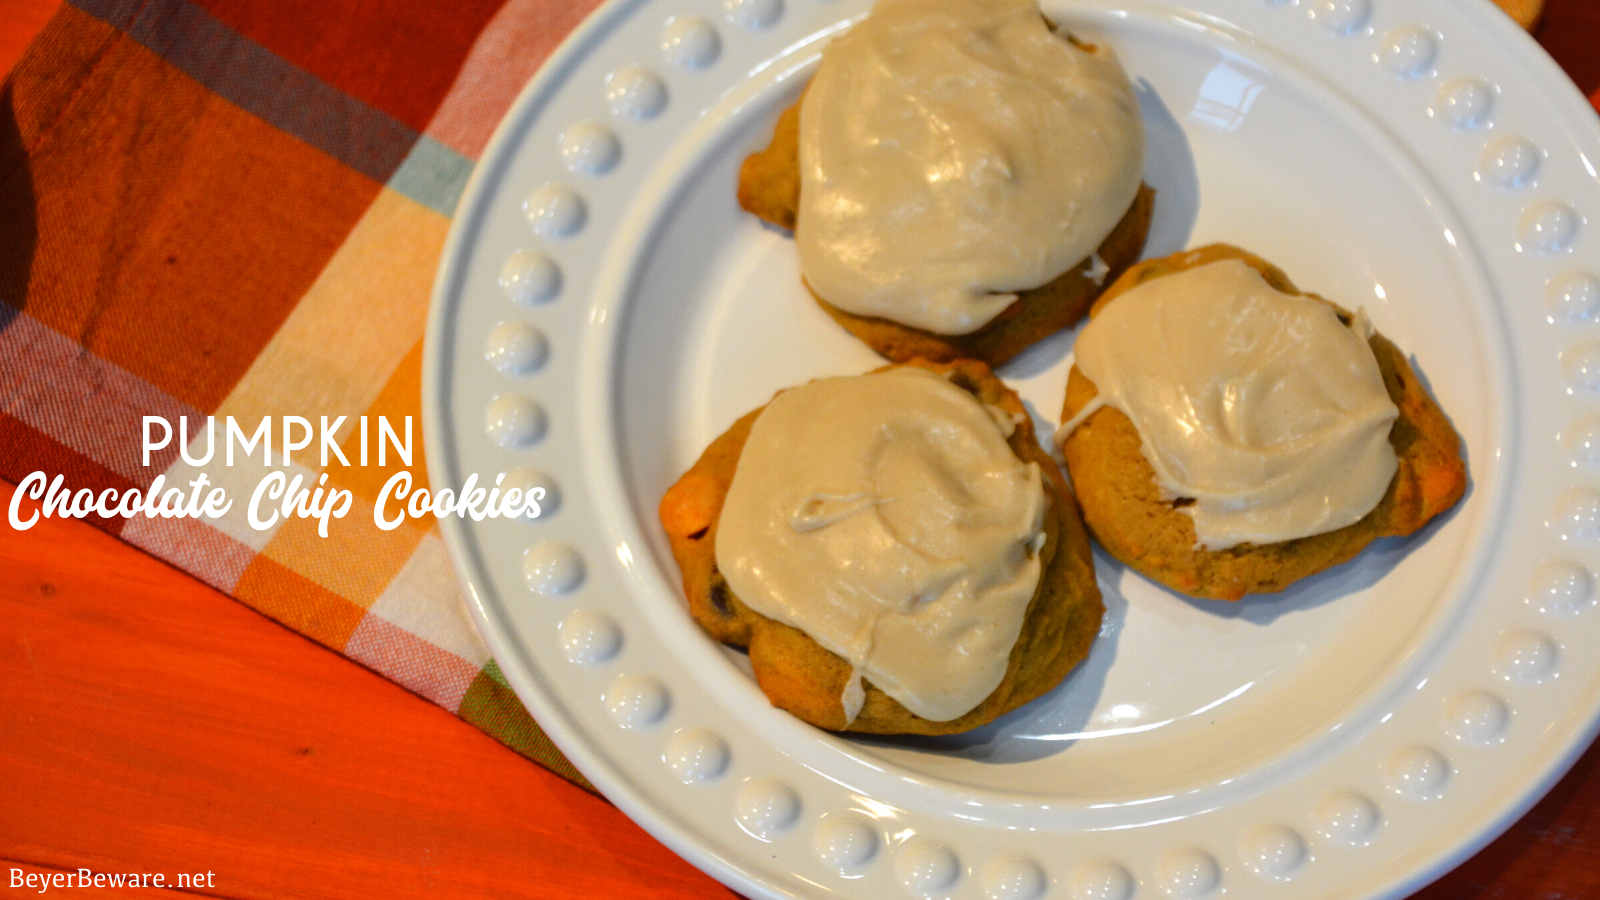 Pumpkin chocolate chip cookies are a made from scratch chocolate chip cookie with real pumpkin in the cookie dough and then topped with brown sugar icing on top!